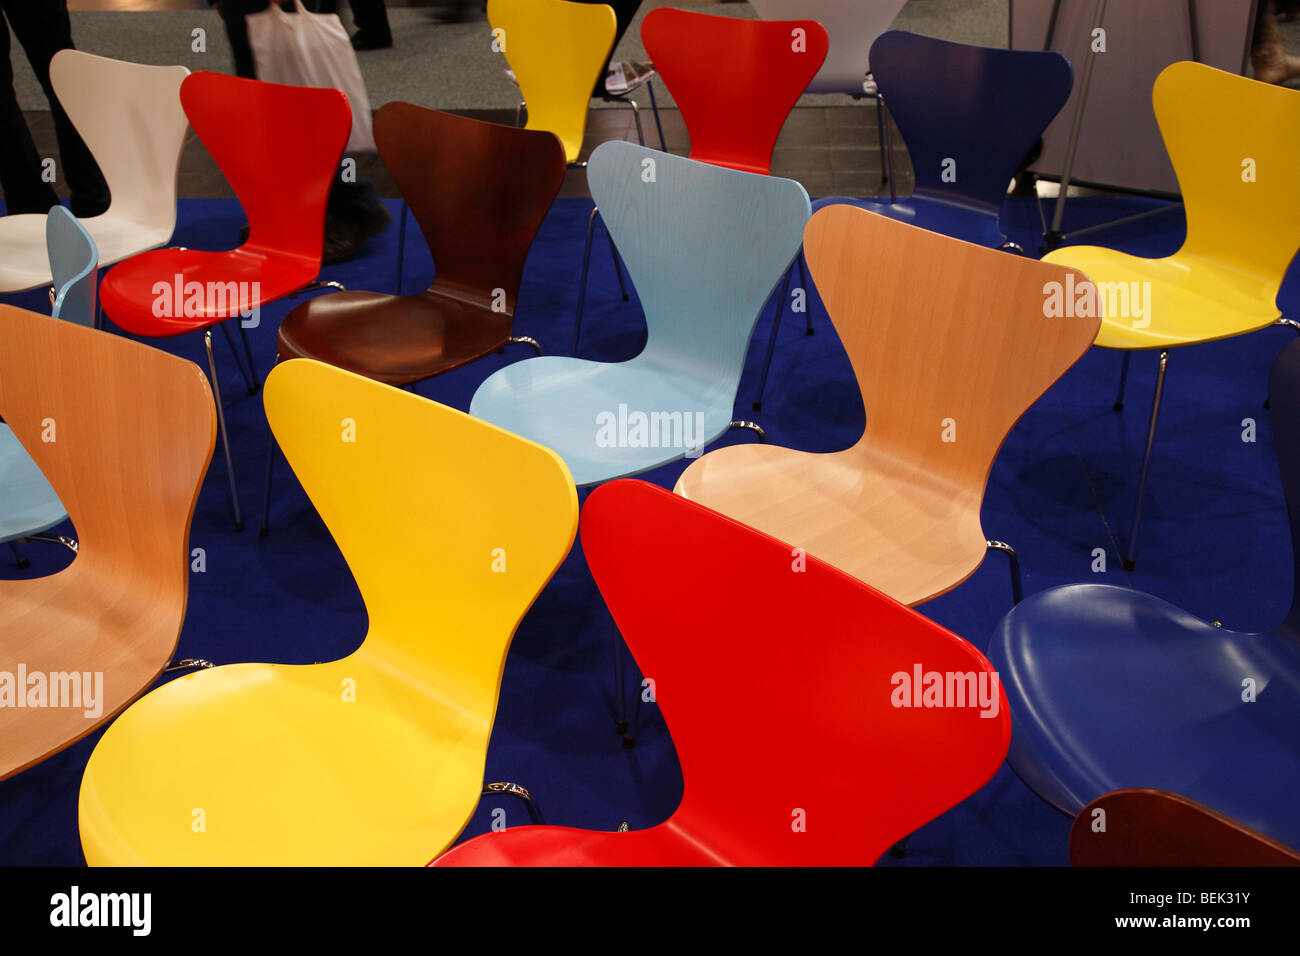 row of colourful chairs Stock Photo